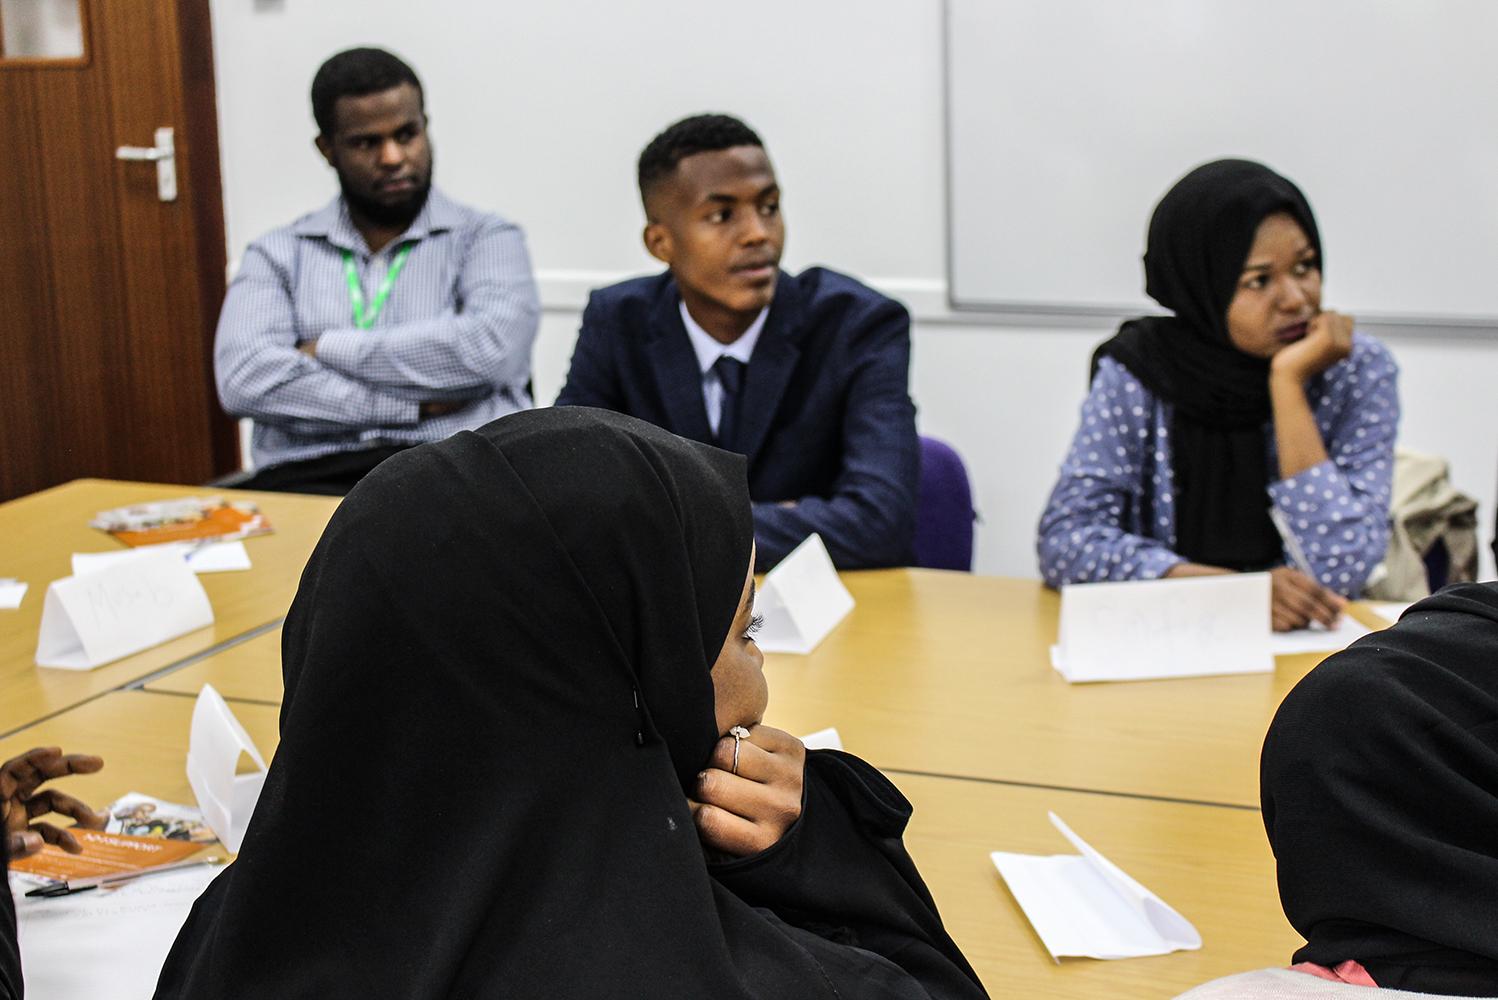 Young refugees attending an employment workshop in Bristol